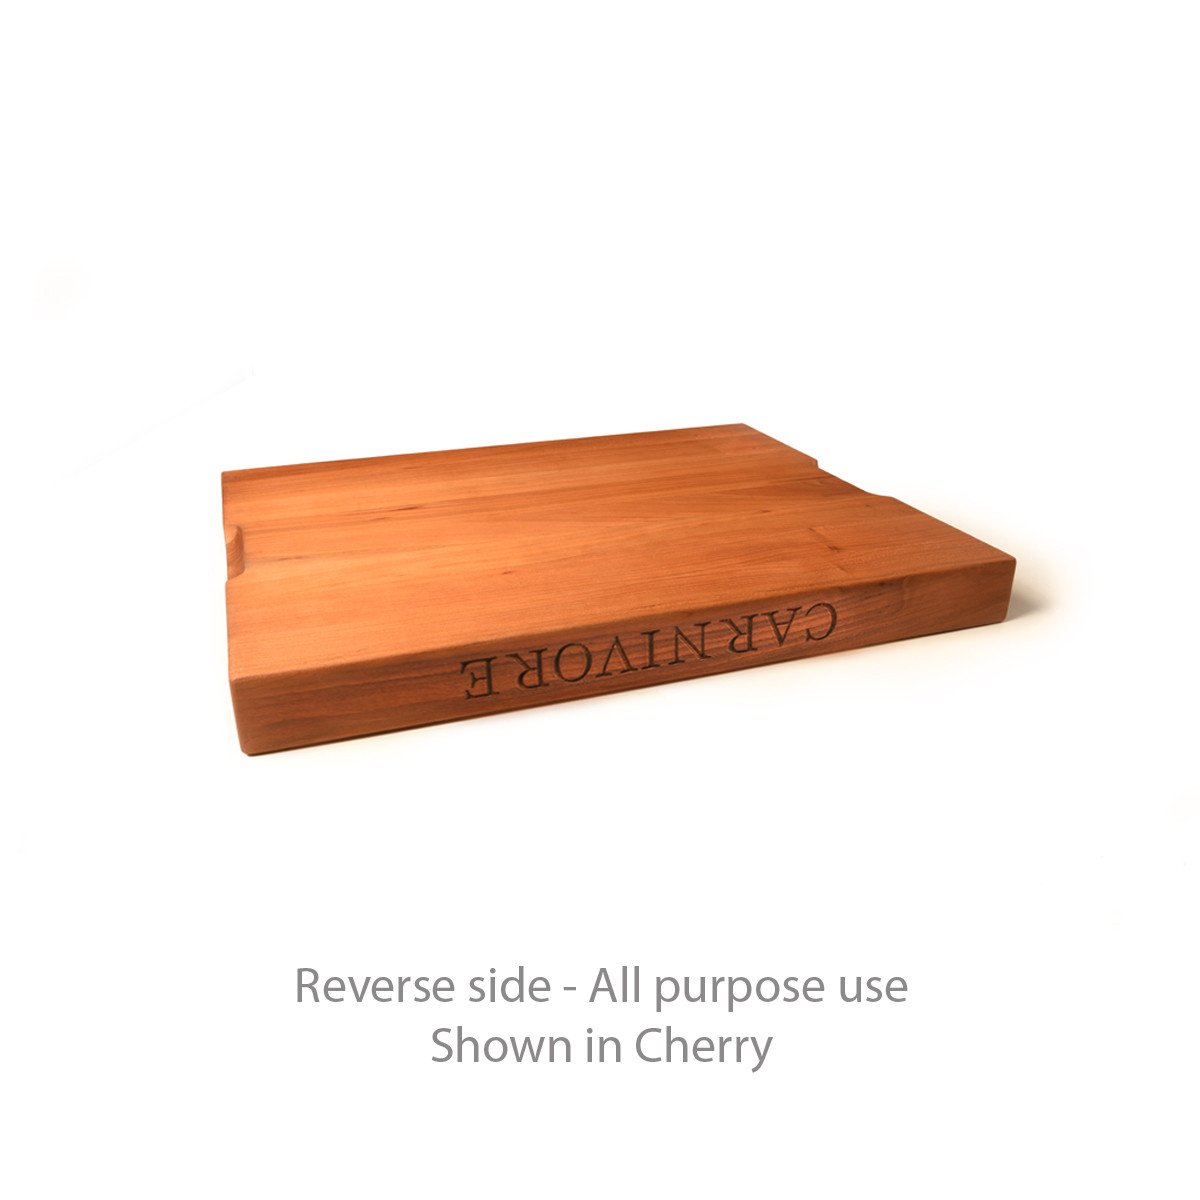 Cutting Board for Meat  Charcuterie Board - Words with Boards, LLC